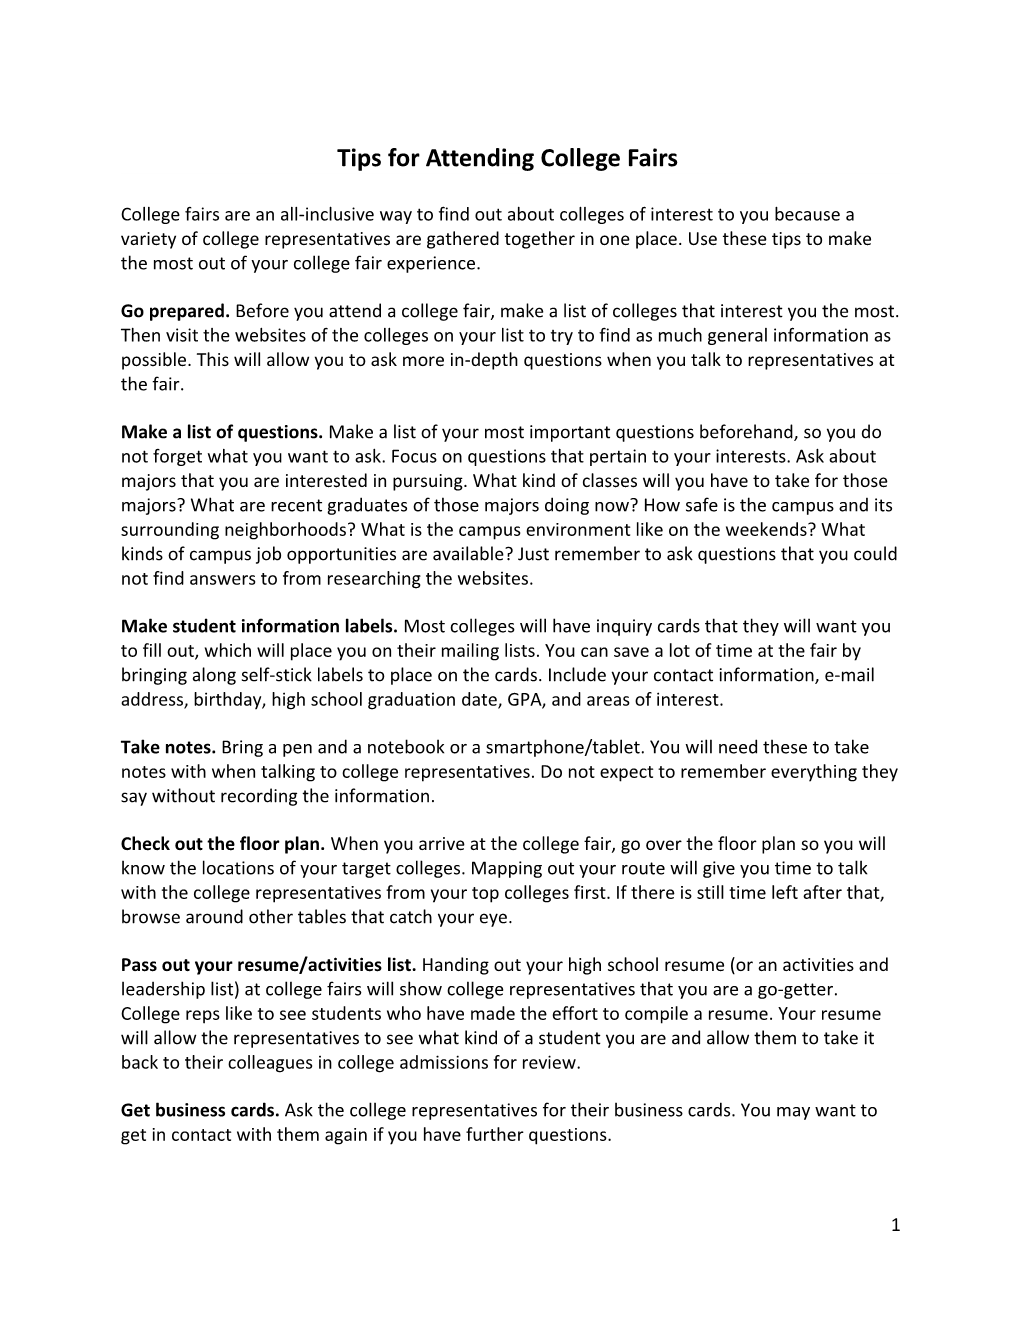 Tips for Attending College Fairs